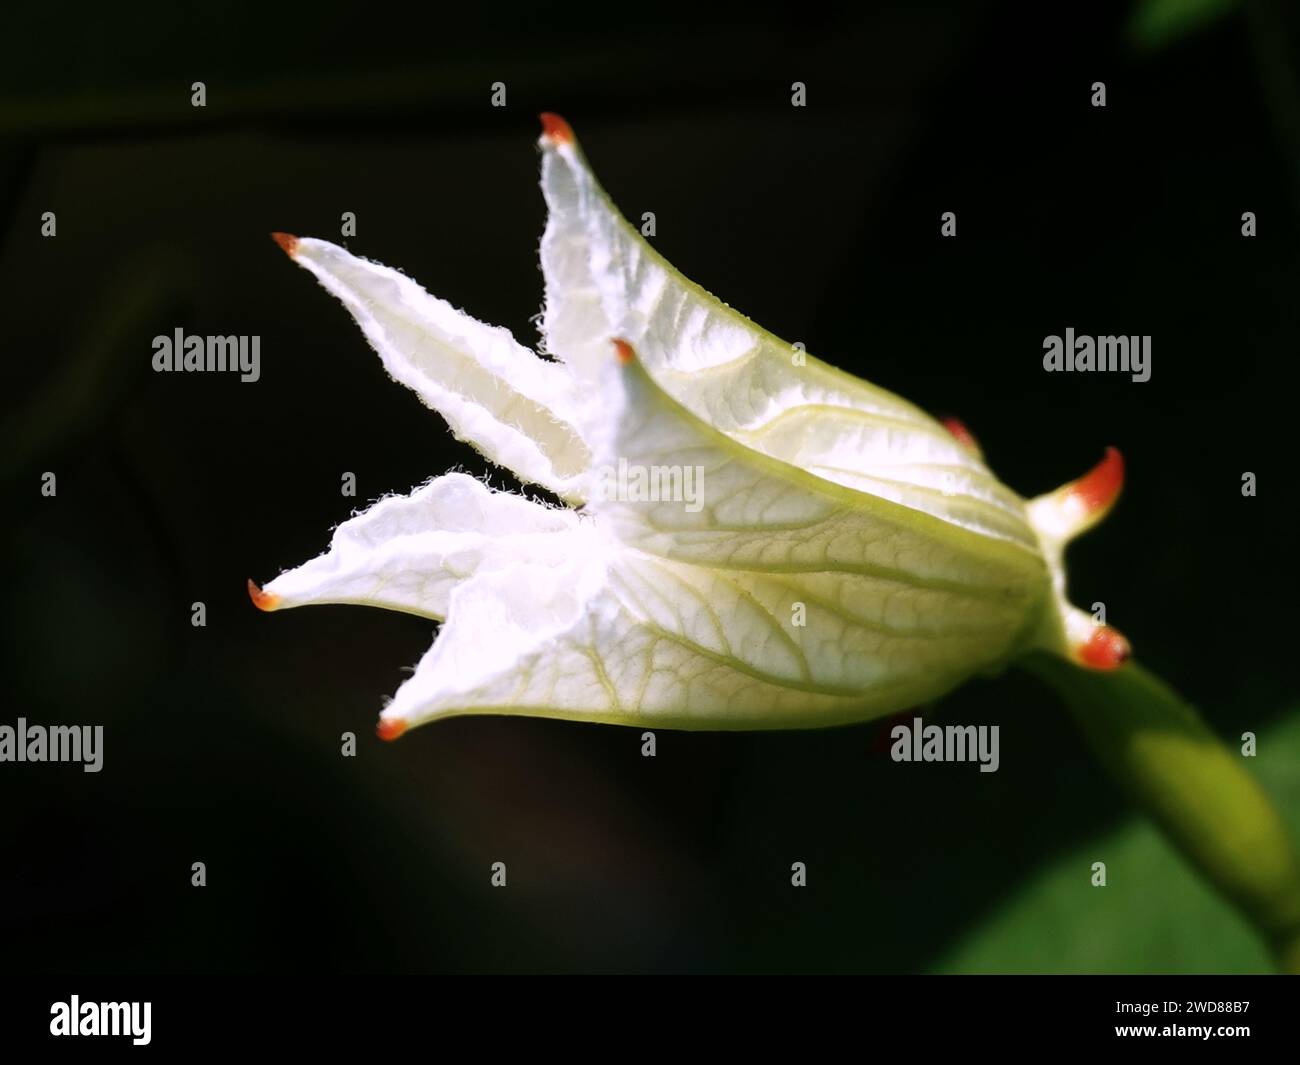 A close-up shot of an ivy gourd flower on a dark background Stock Photo